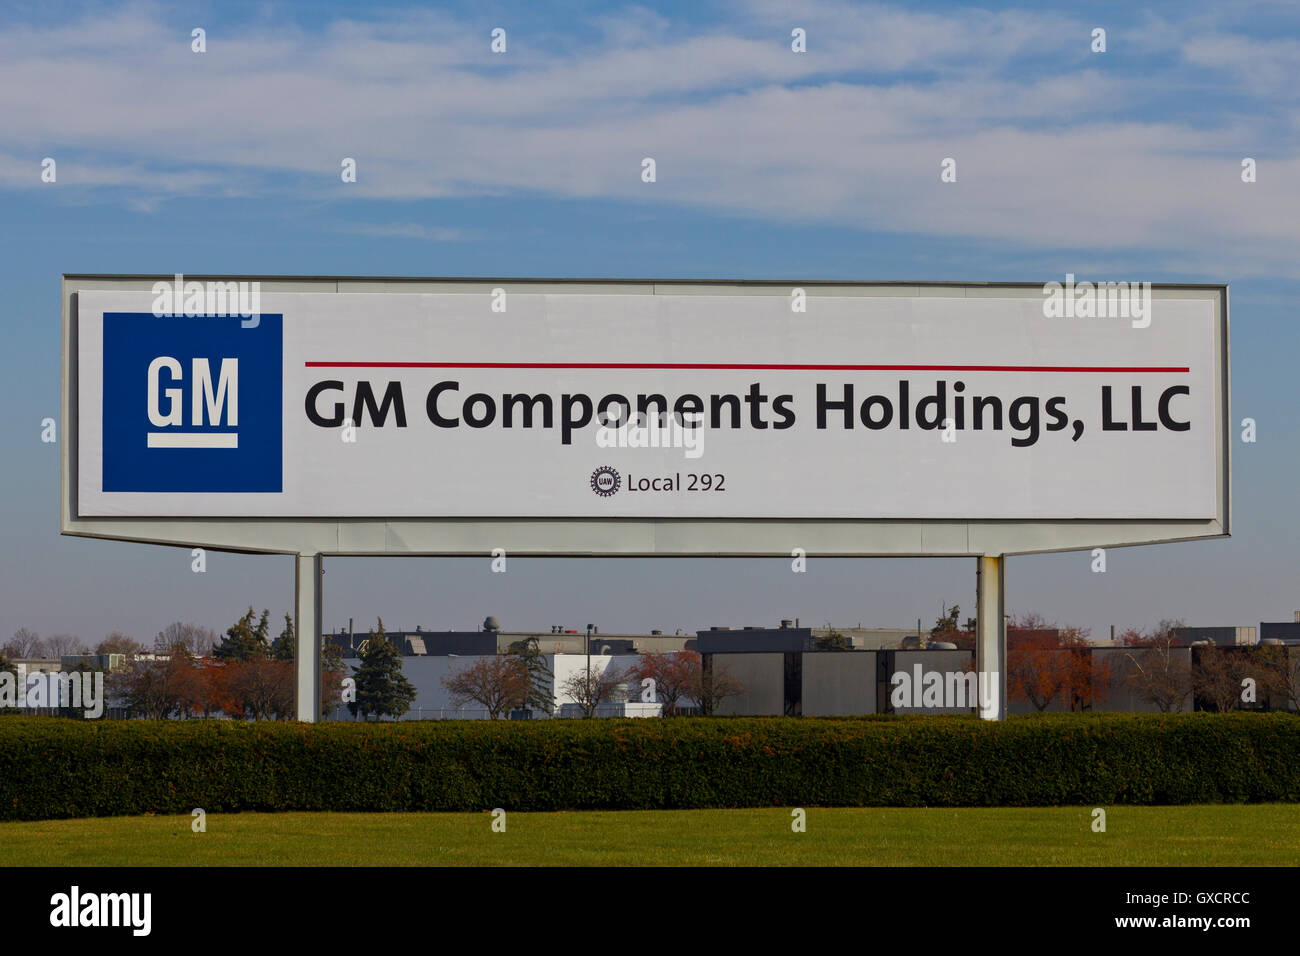 Kokomo - Circa November 2015: GM Components Holdings. GMCH is a supplier of leading electronics manufacturing services I Stock Photo